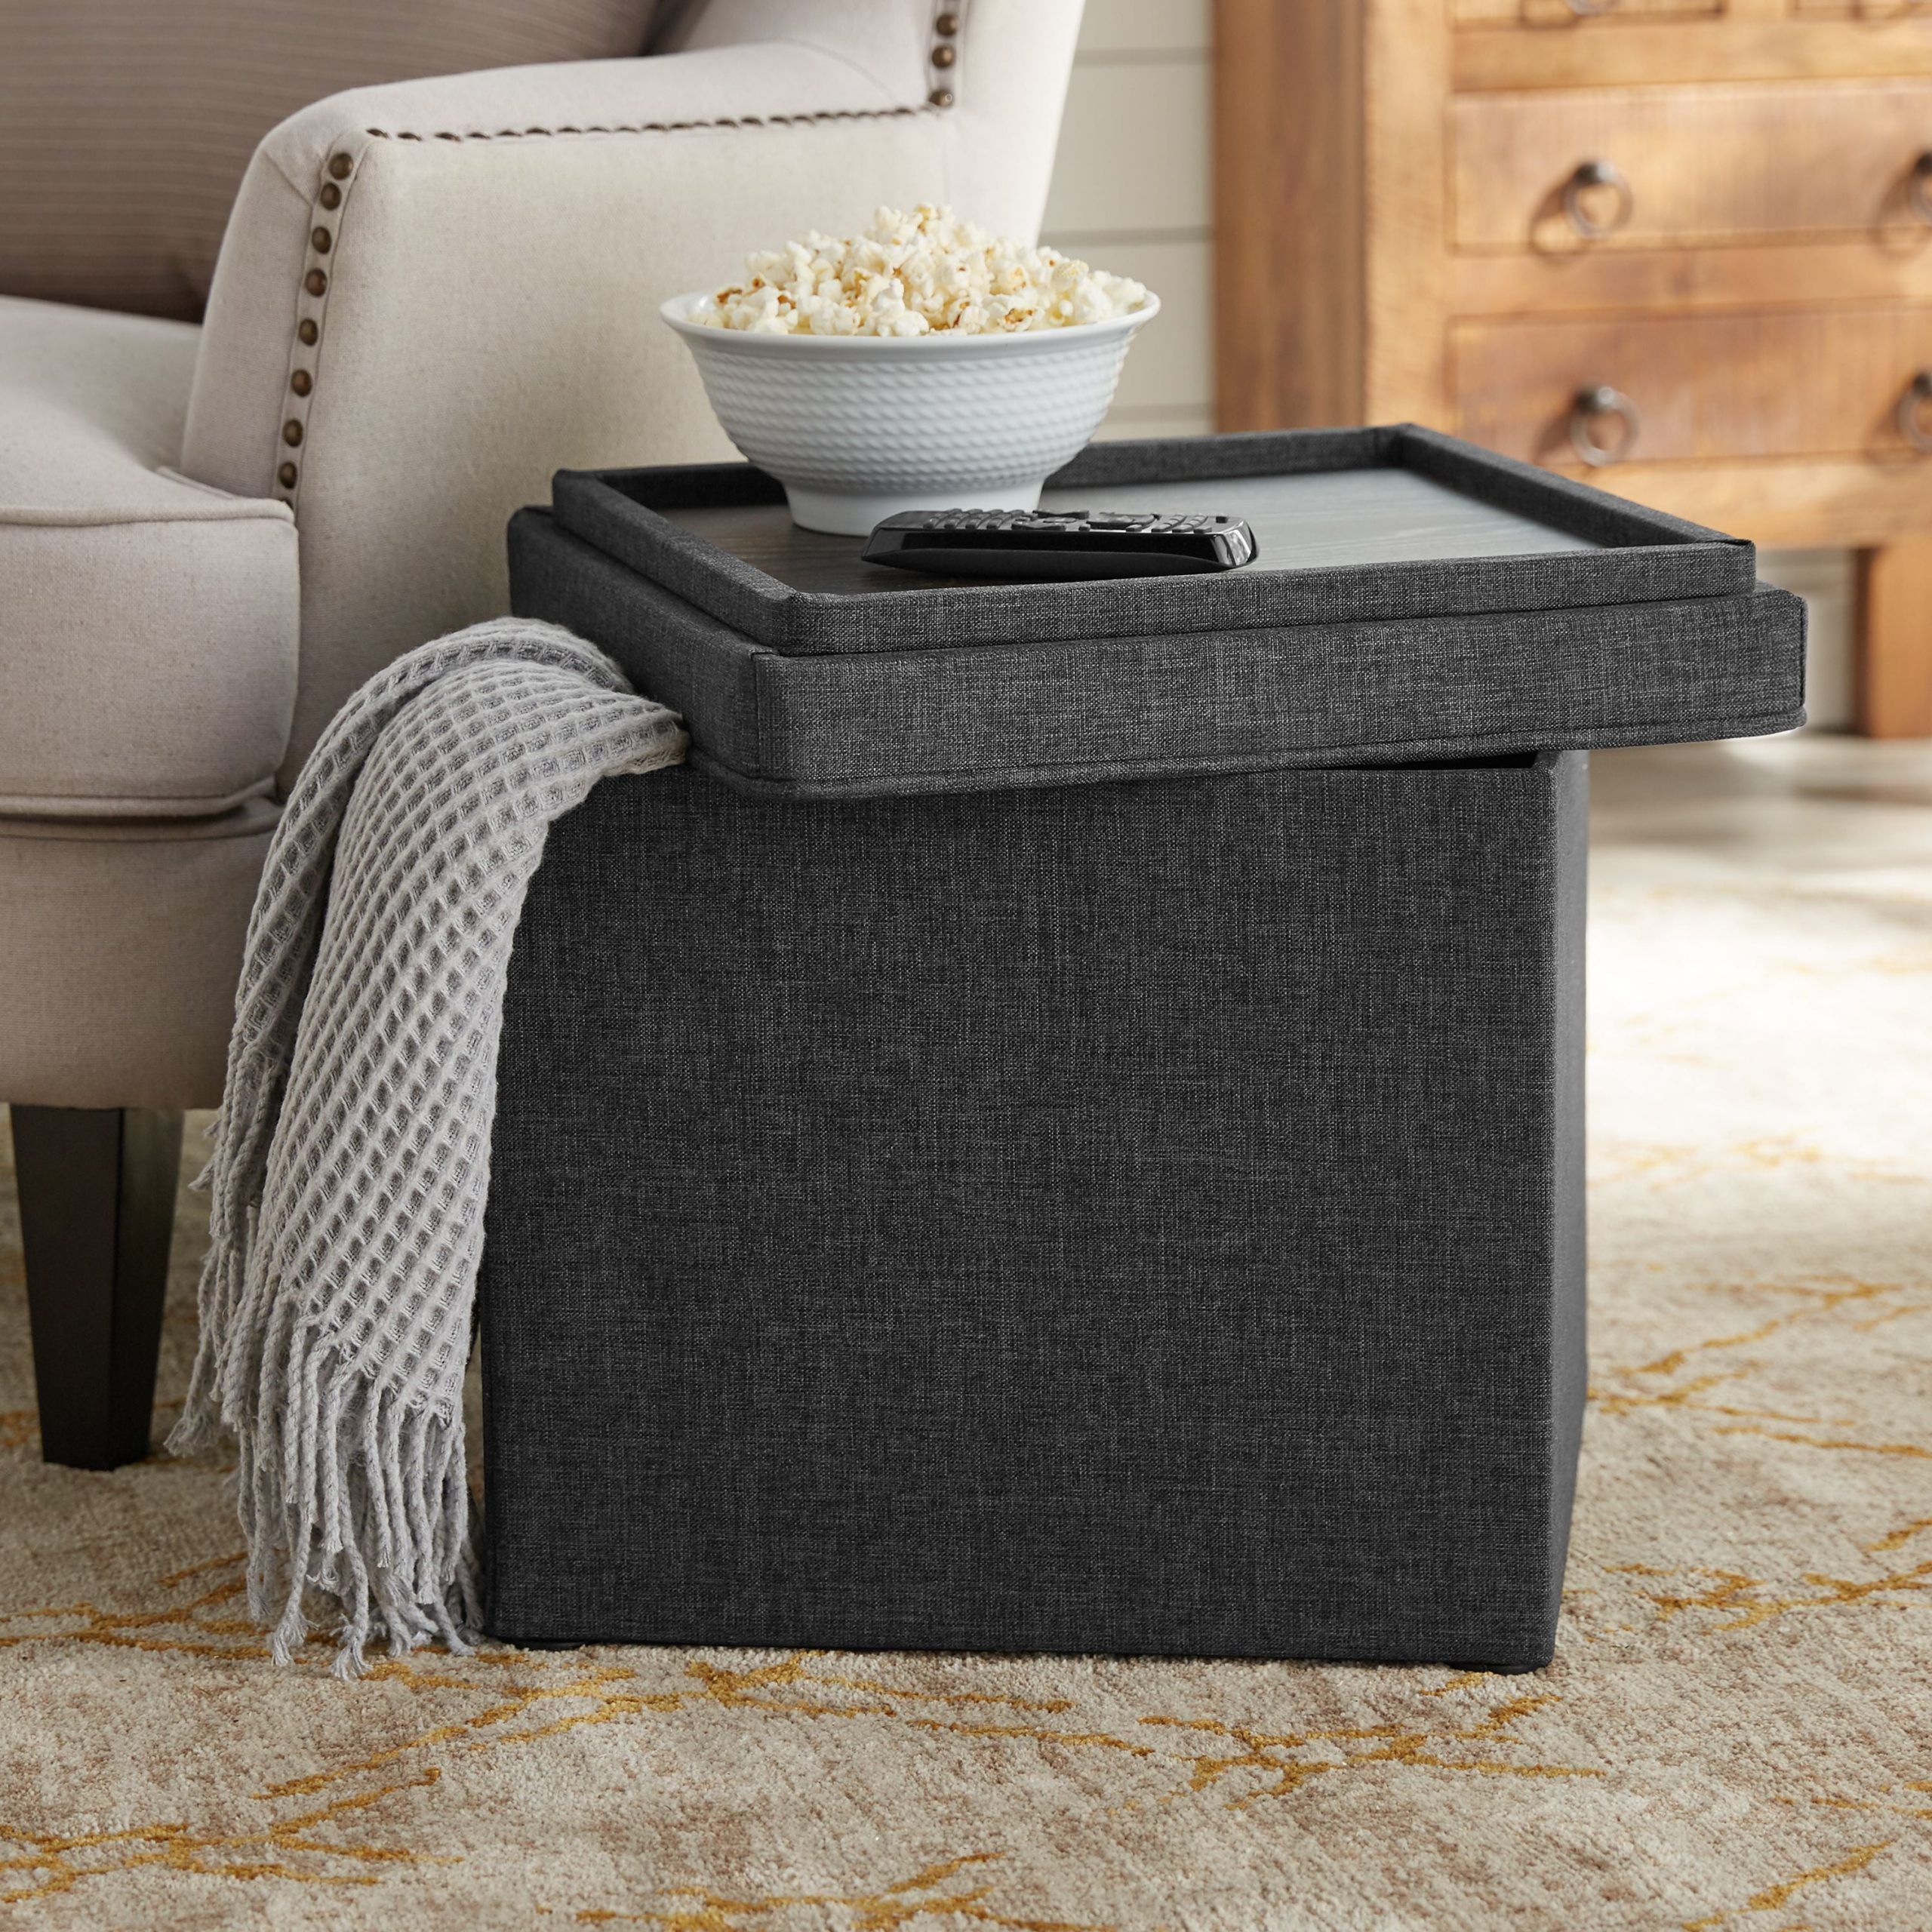 Better Homes & Gardens Storage Ottoman With Tray, 16", Grey – Walmart In 16 Inch Ottomans (View 13 of 15)